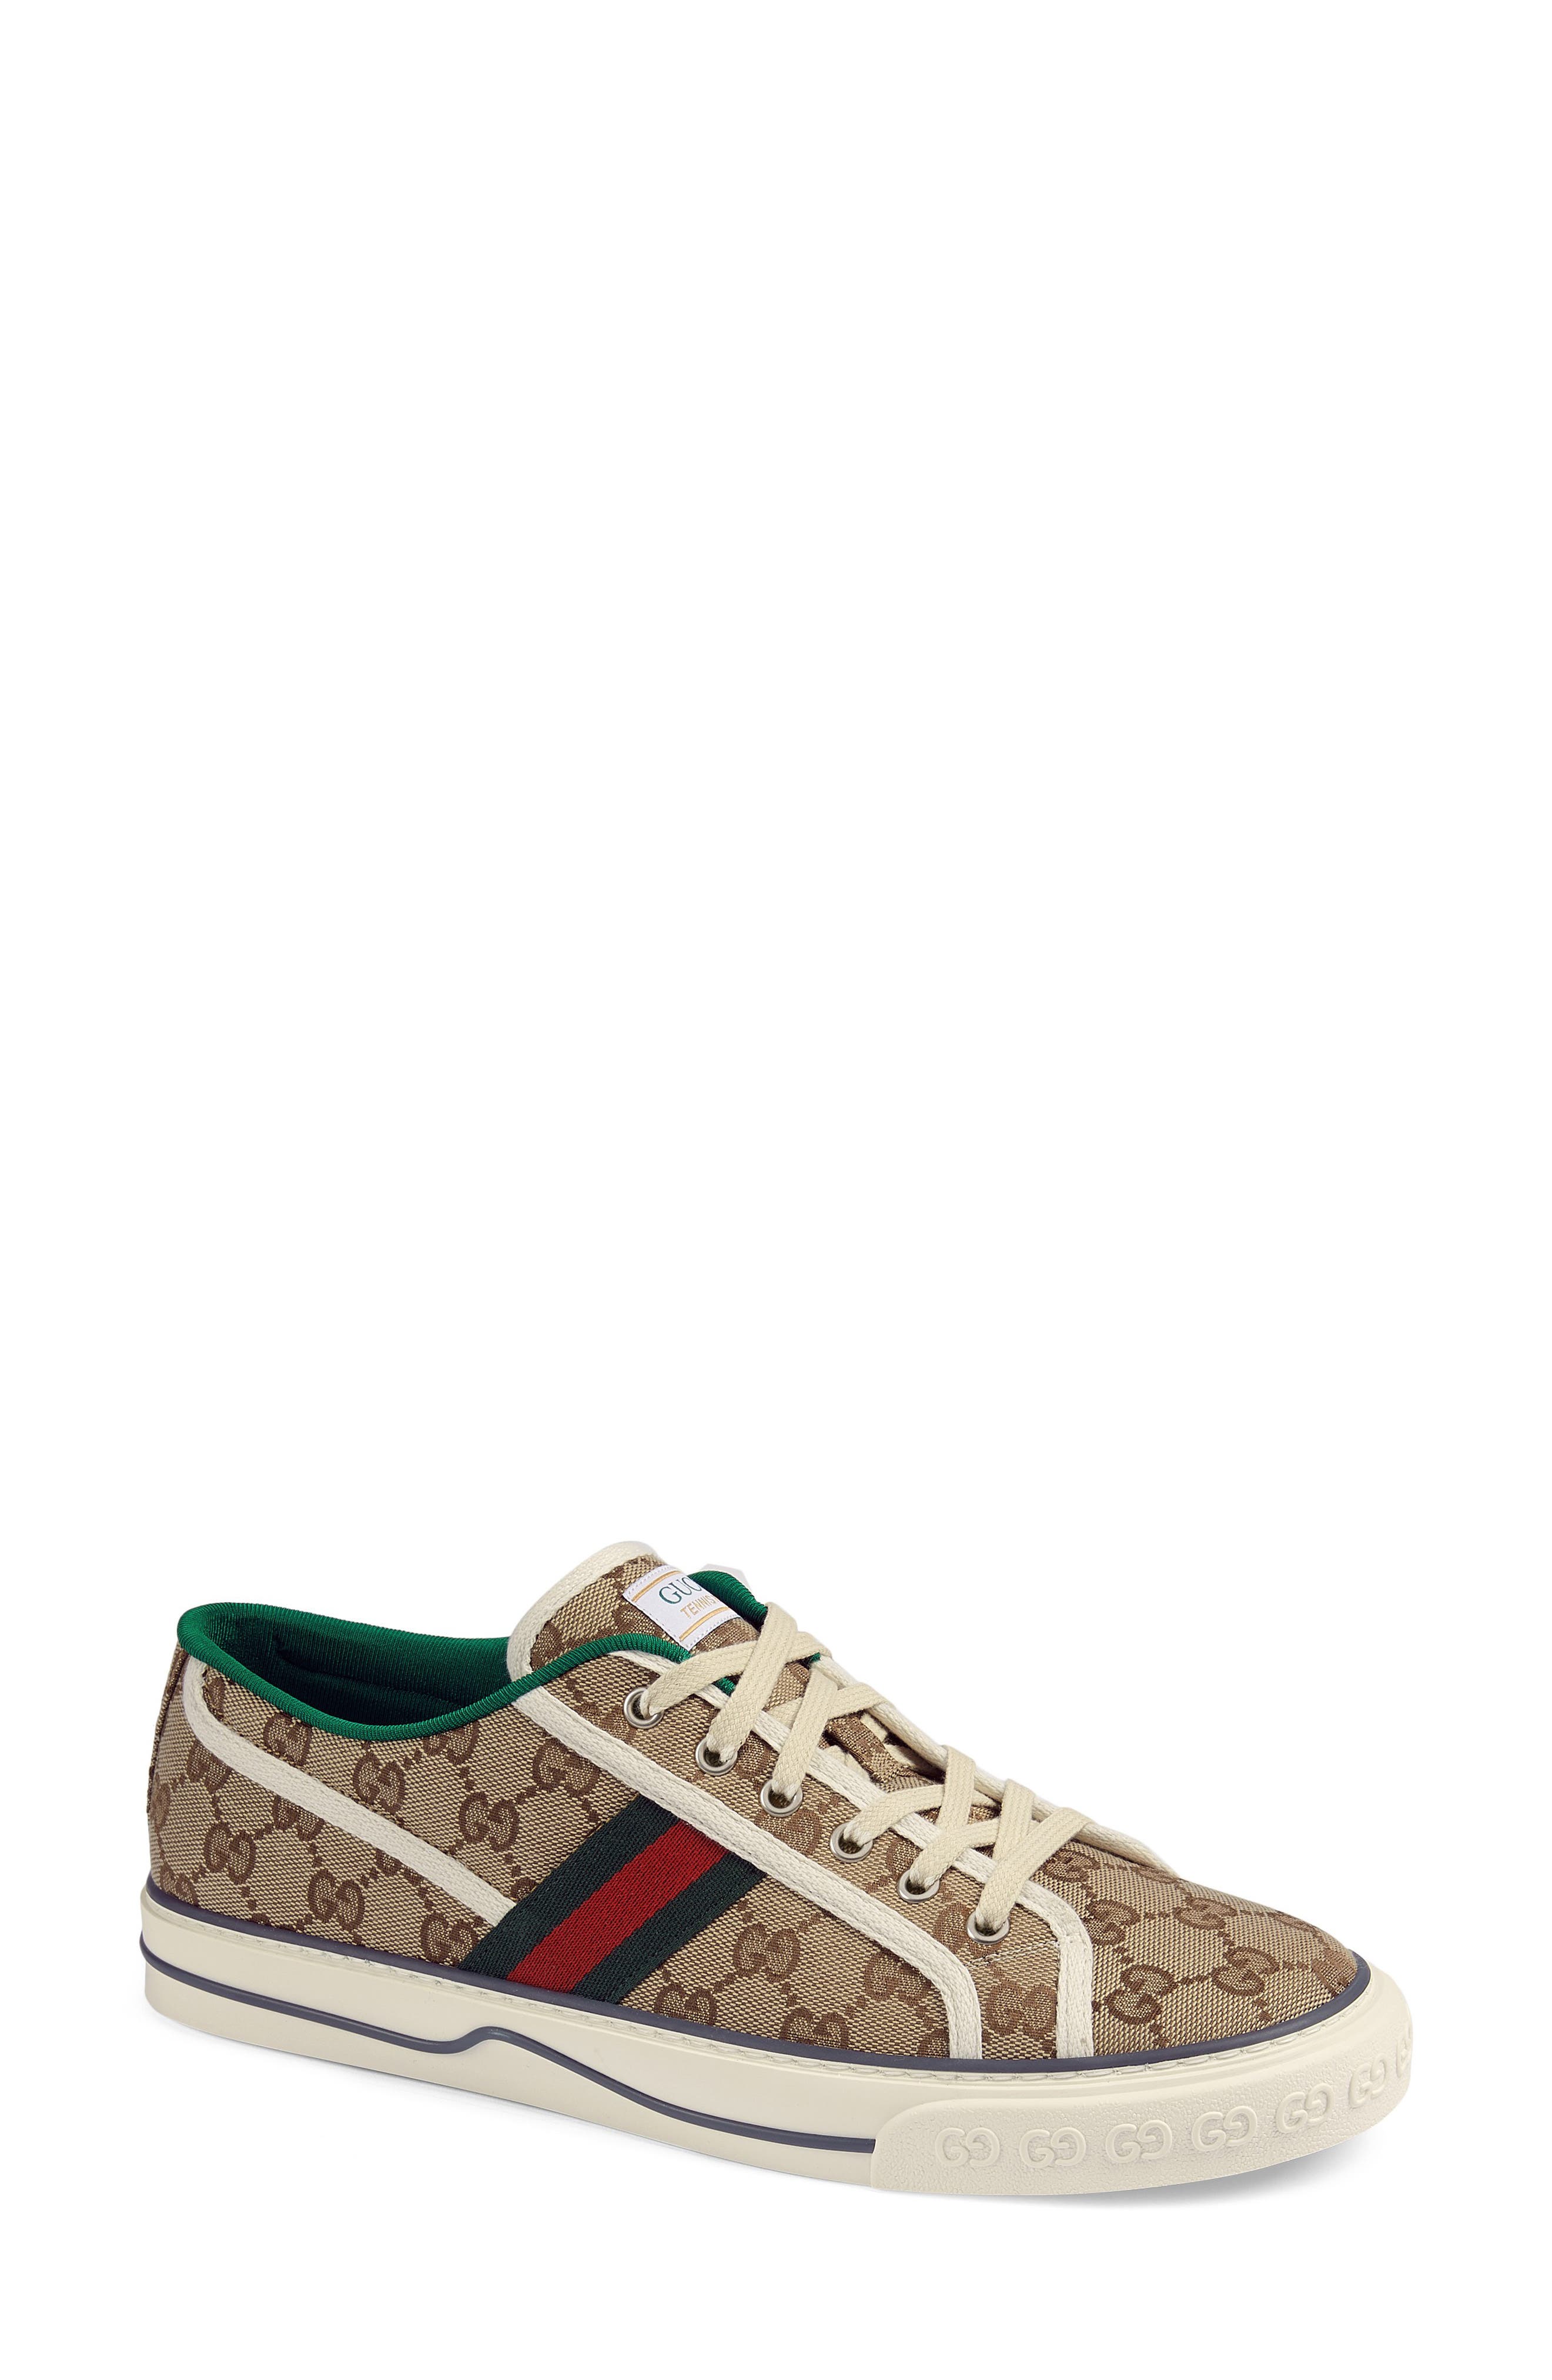 gucci sneakers nordstrom